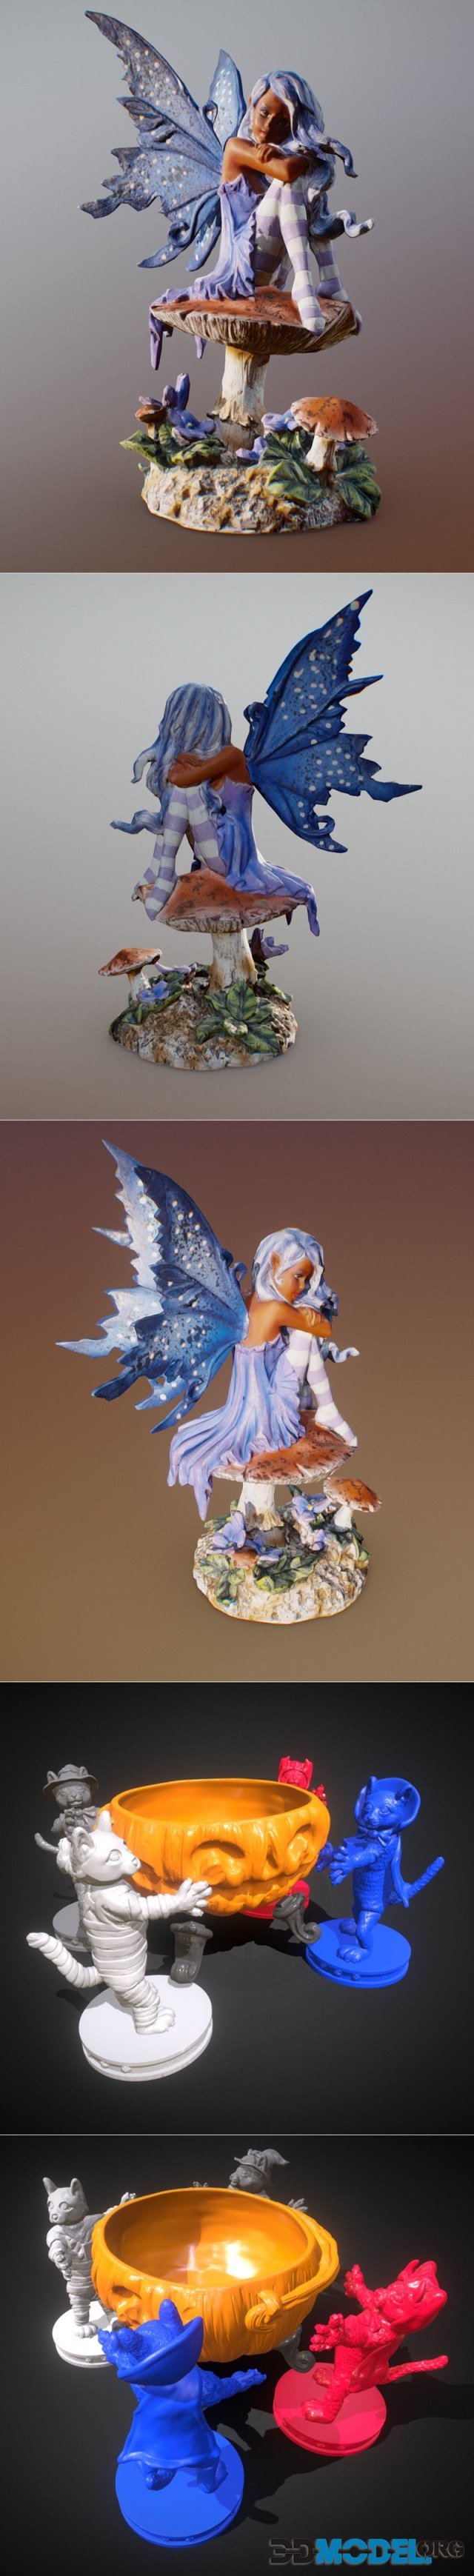 Violet Pixie Fairy and The Great Pumking Dance Candy Dispenser – Printable